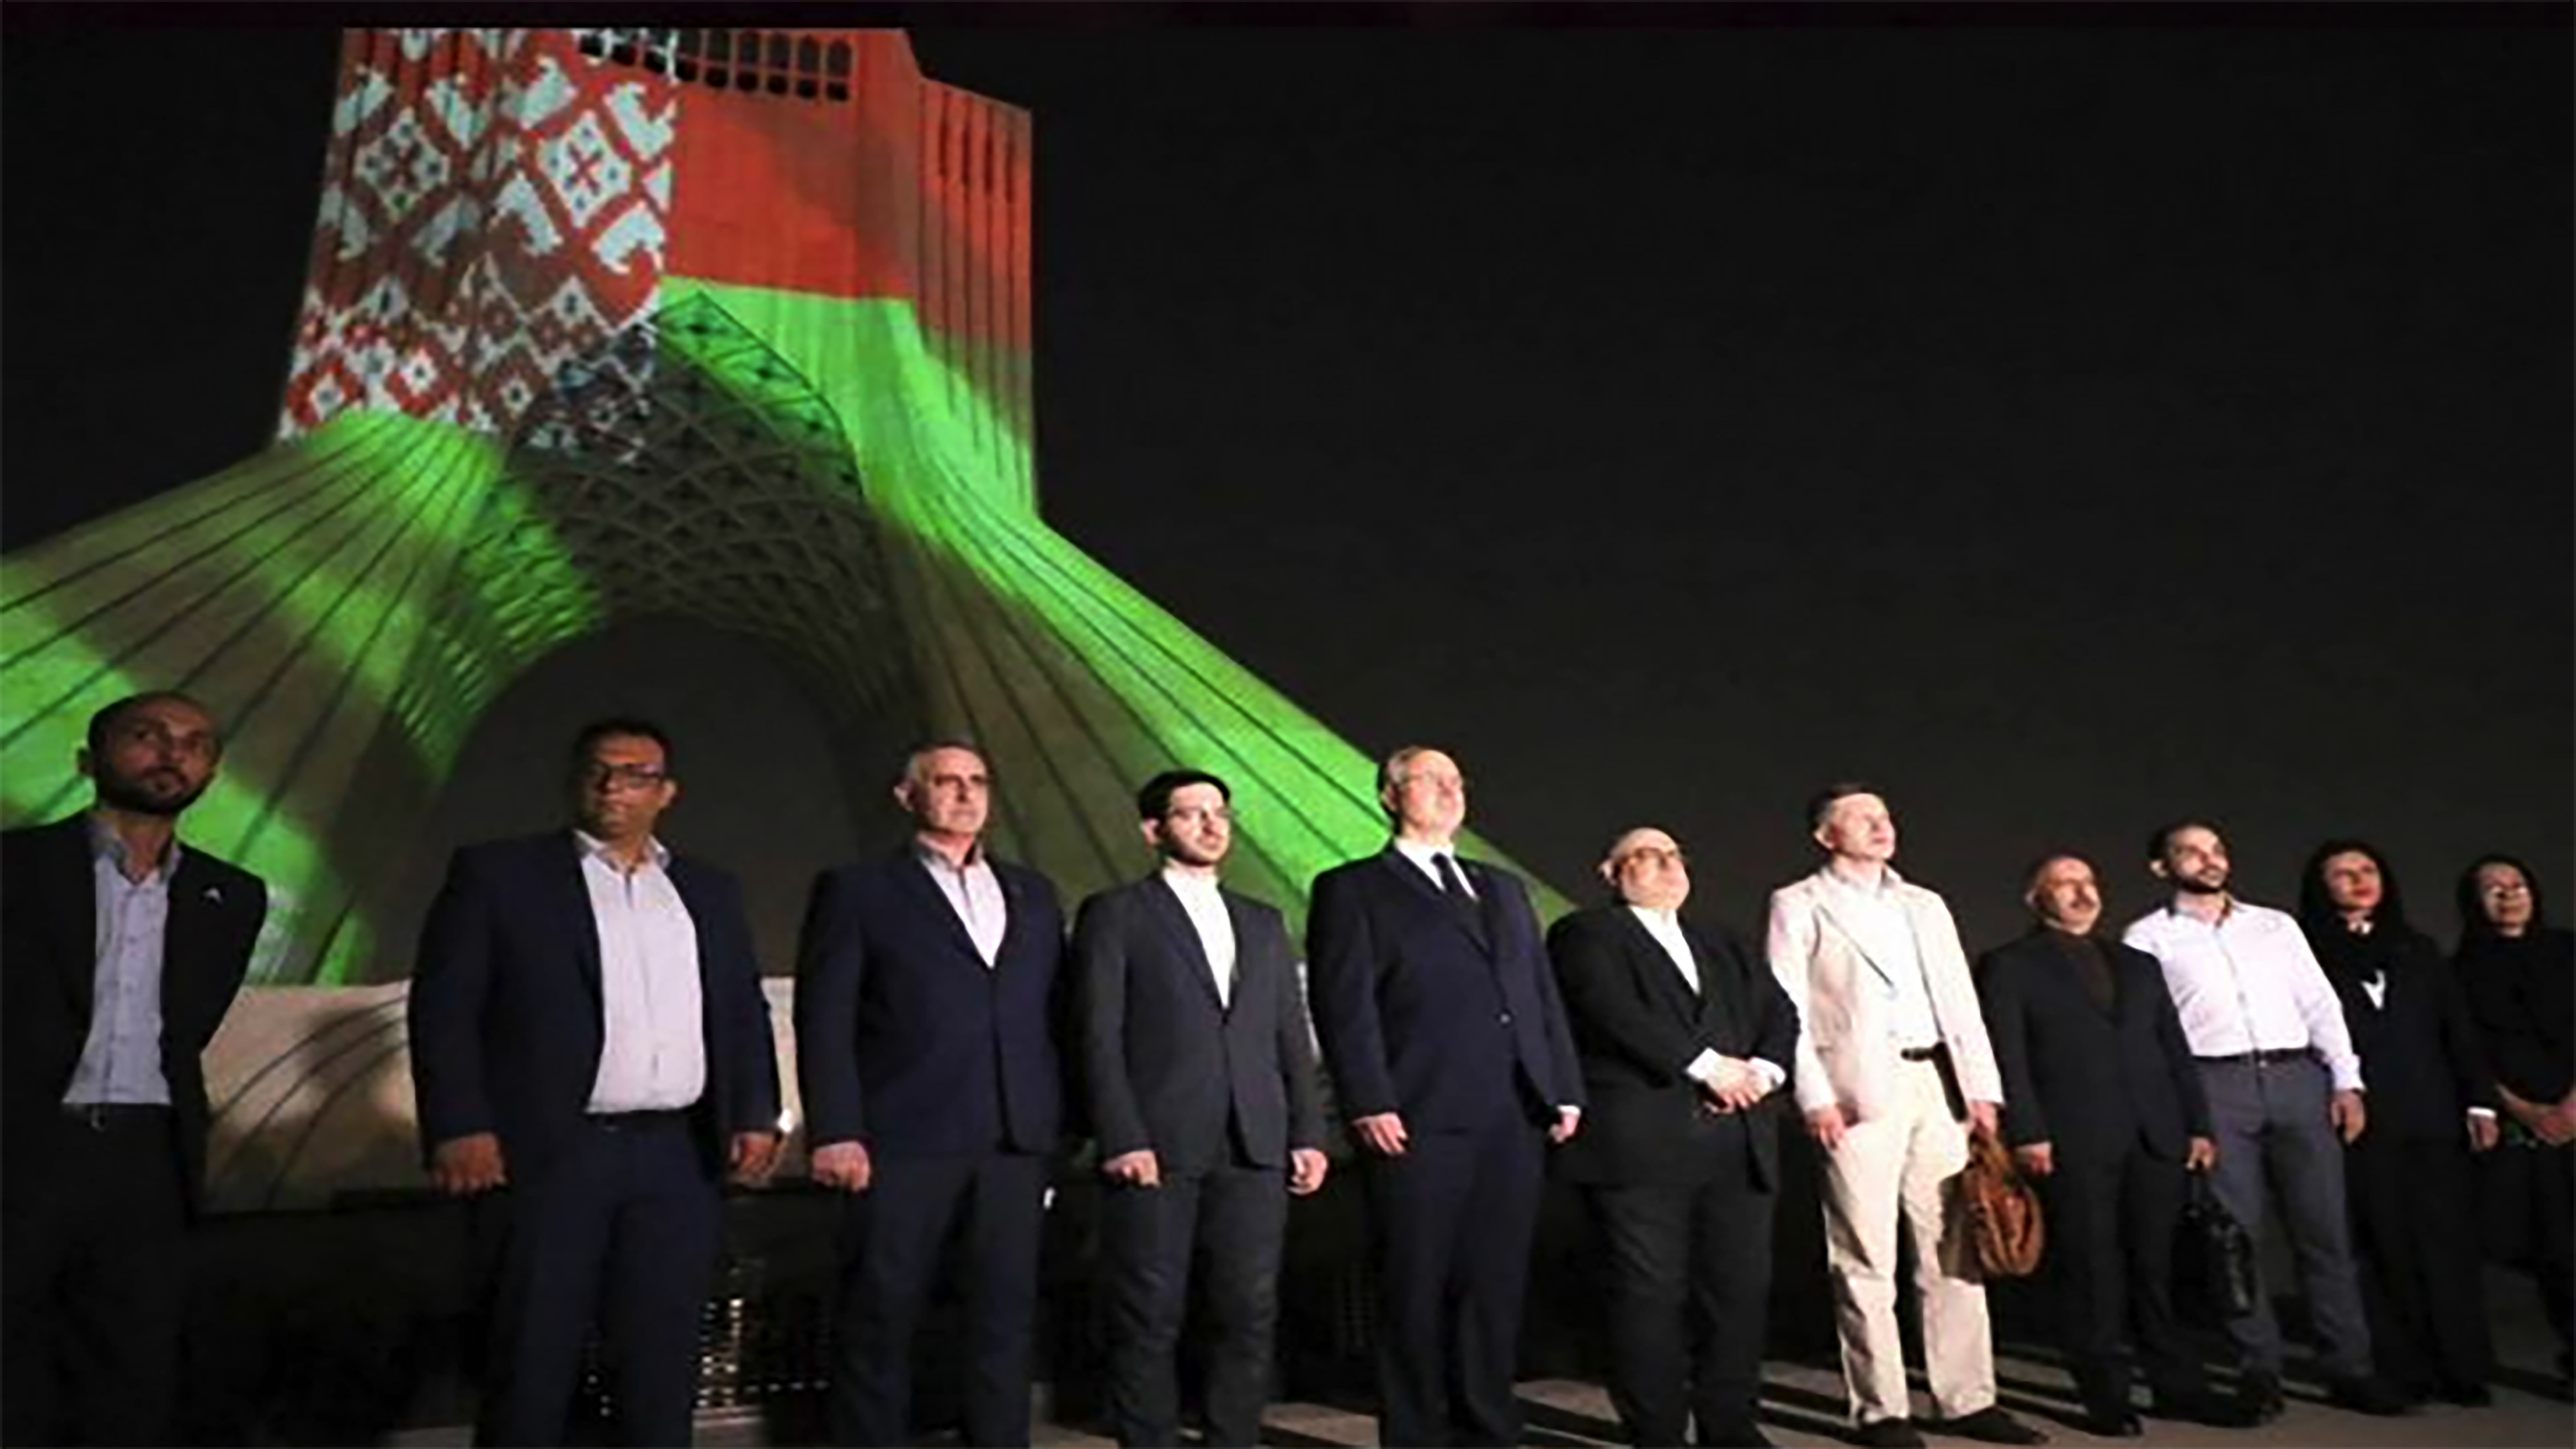 The celebration of the Independence Day of Belarus was held at the Azadi Tower